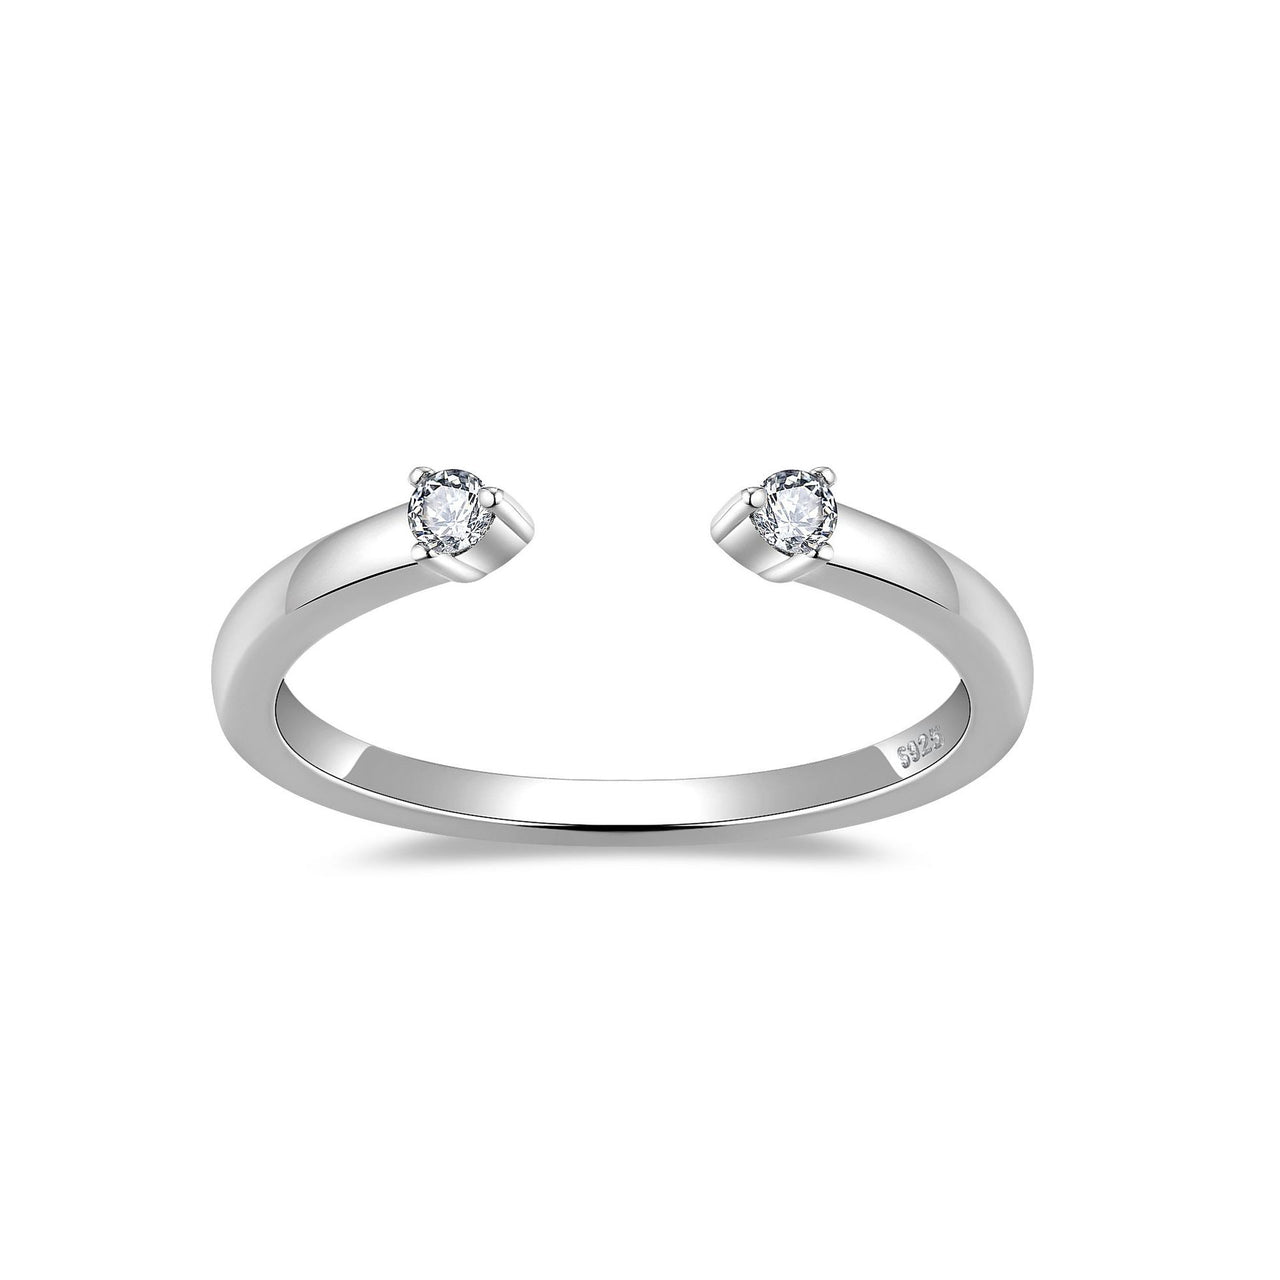 IE0569 MIXED MOISSANITE DIAMOND RING IN STERLING SILVER